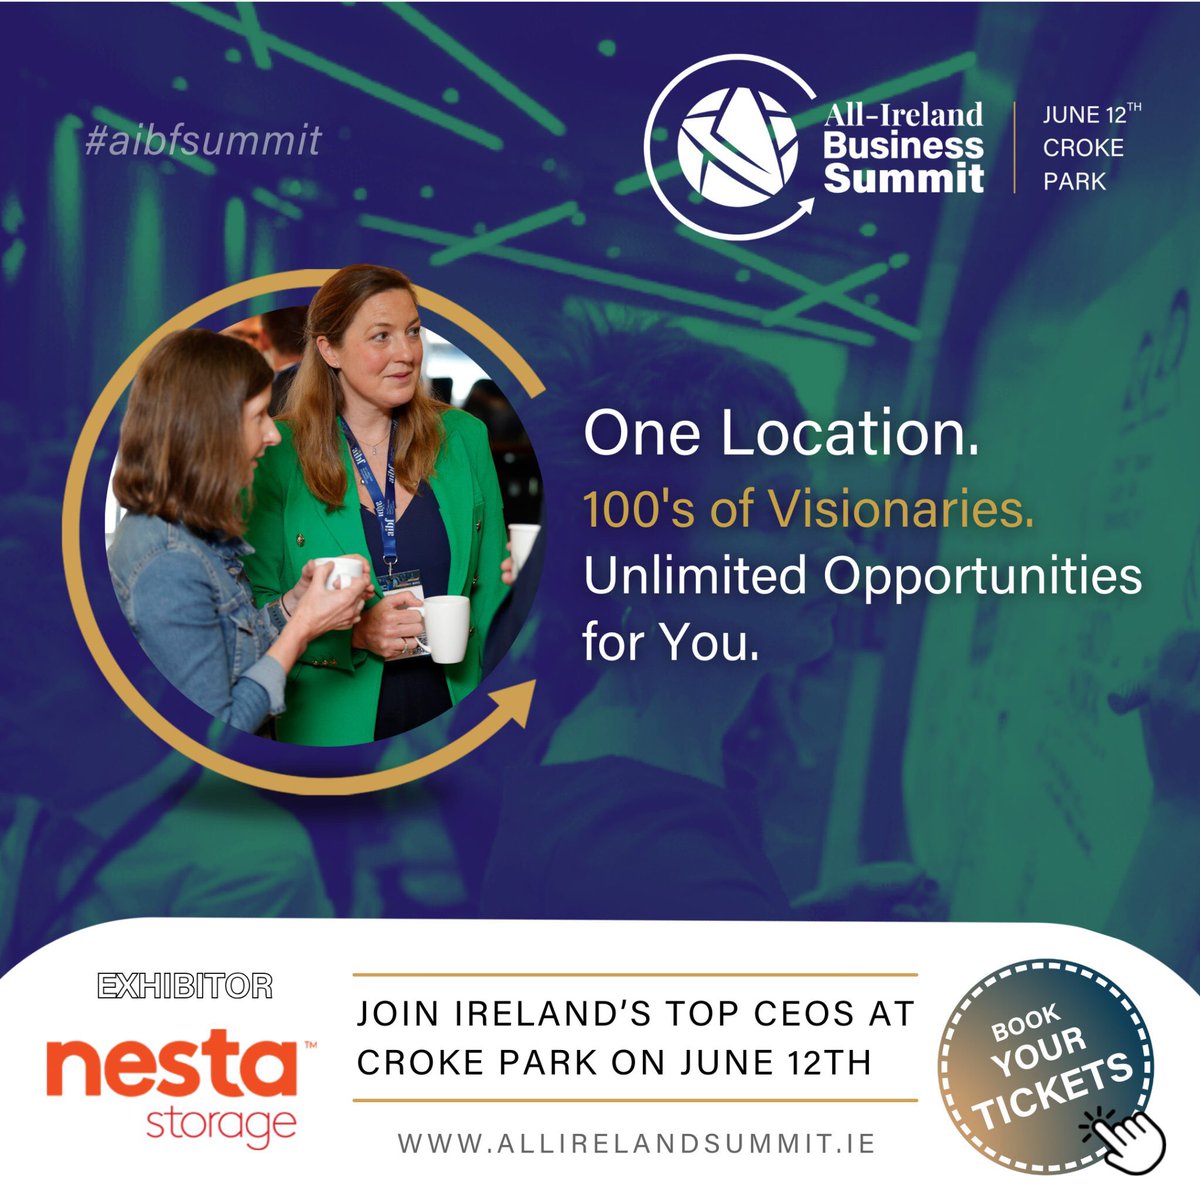 🎉 We are thrilled to have Nesta exhibiting with us at the All-Ireland Business Summit 2024! NESTA is a family-run indigenous business that was established in 1989 and is the largest and oldest self-storage provider in Ireland, and is part of the Kefron Group. #AIBFSummit